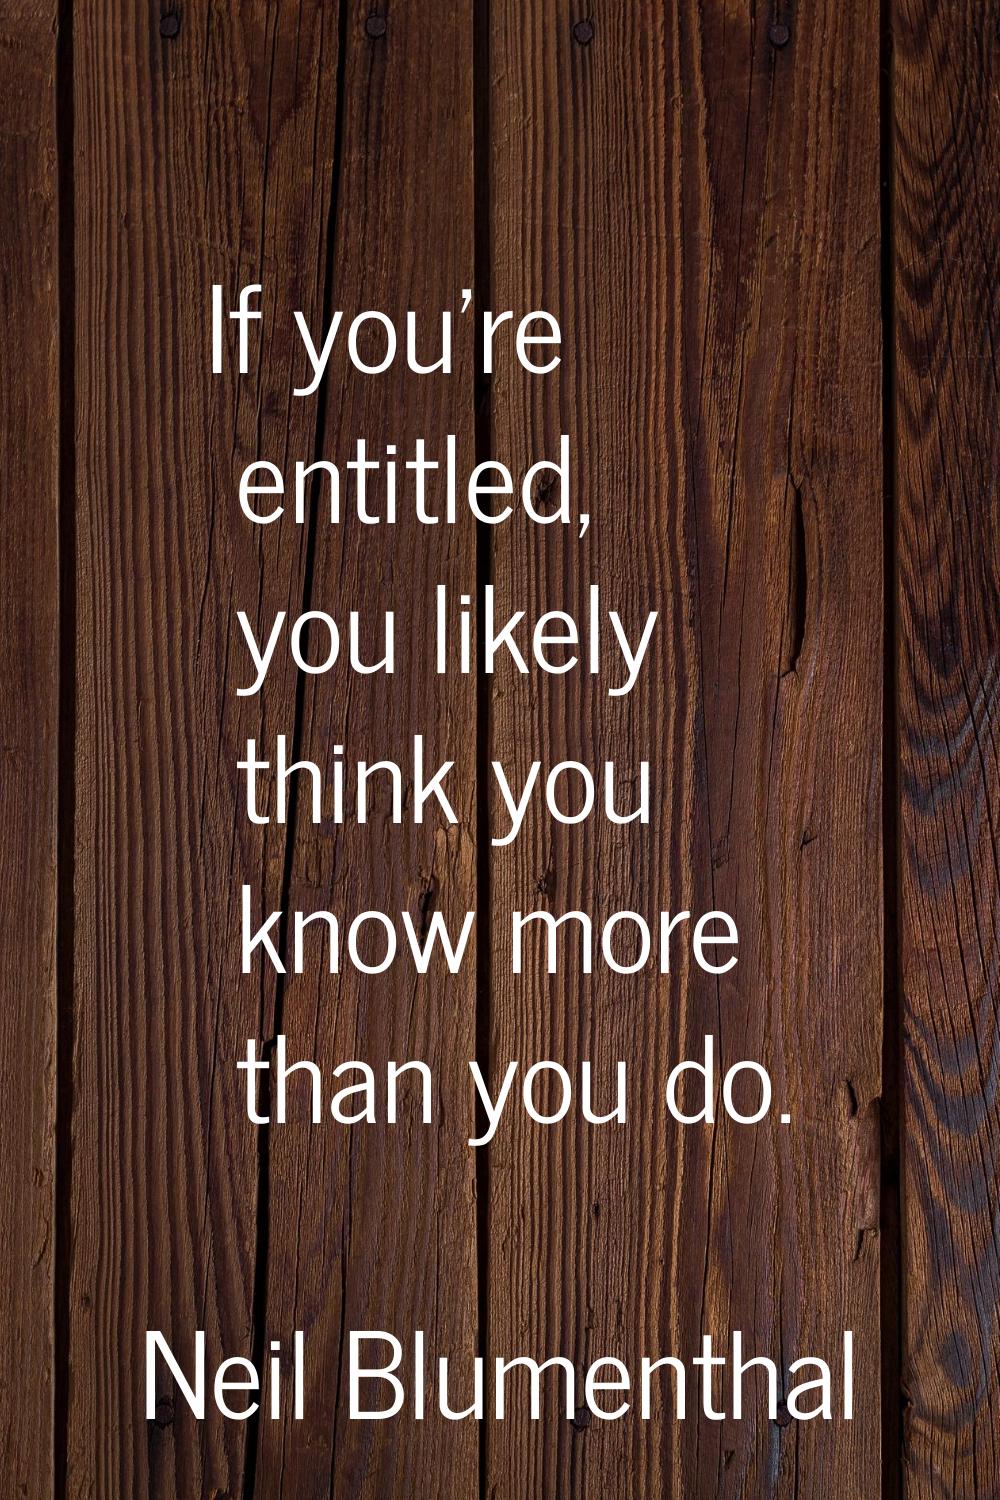 If you're entitled, you likely think you know more than you do.